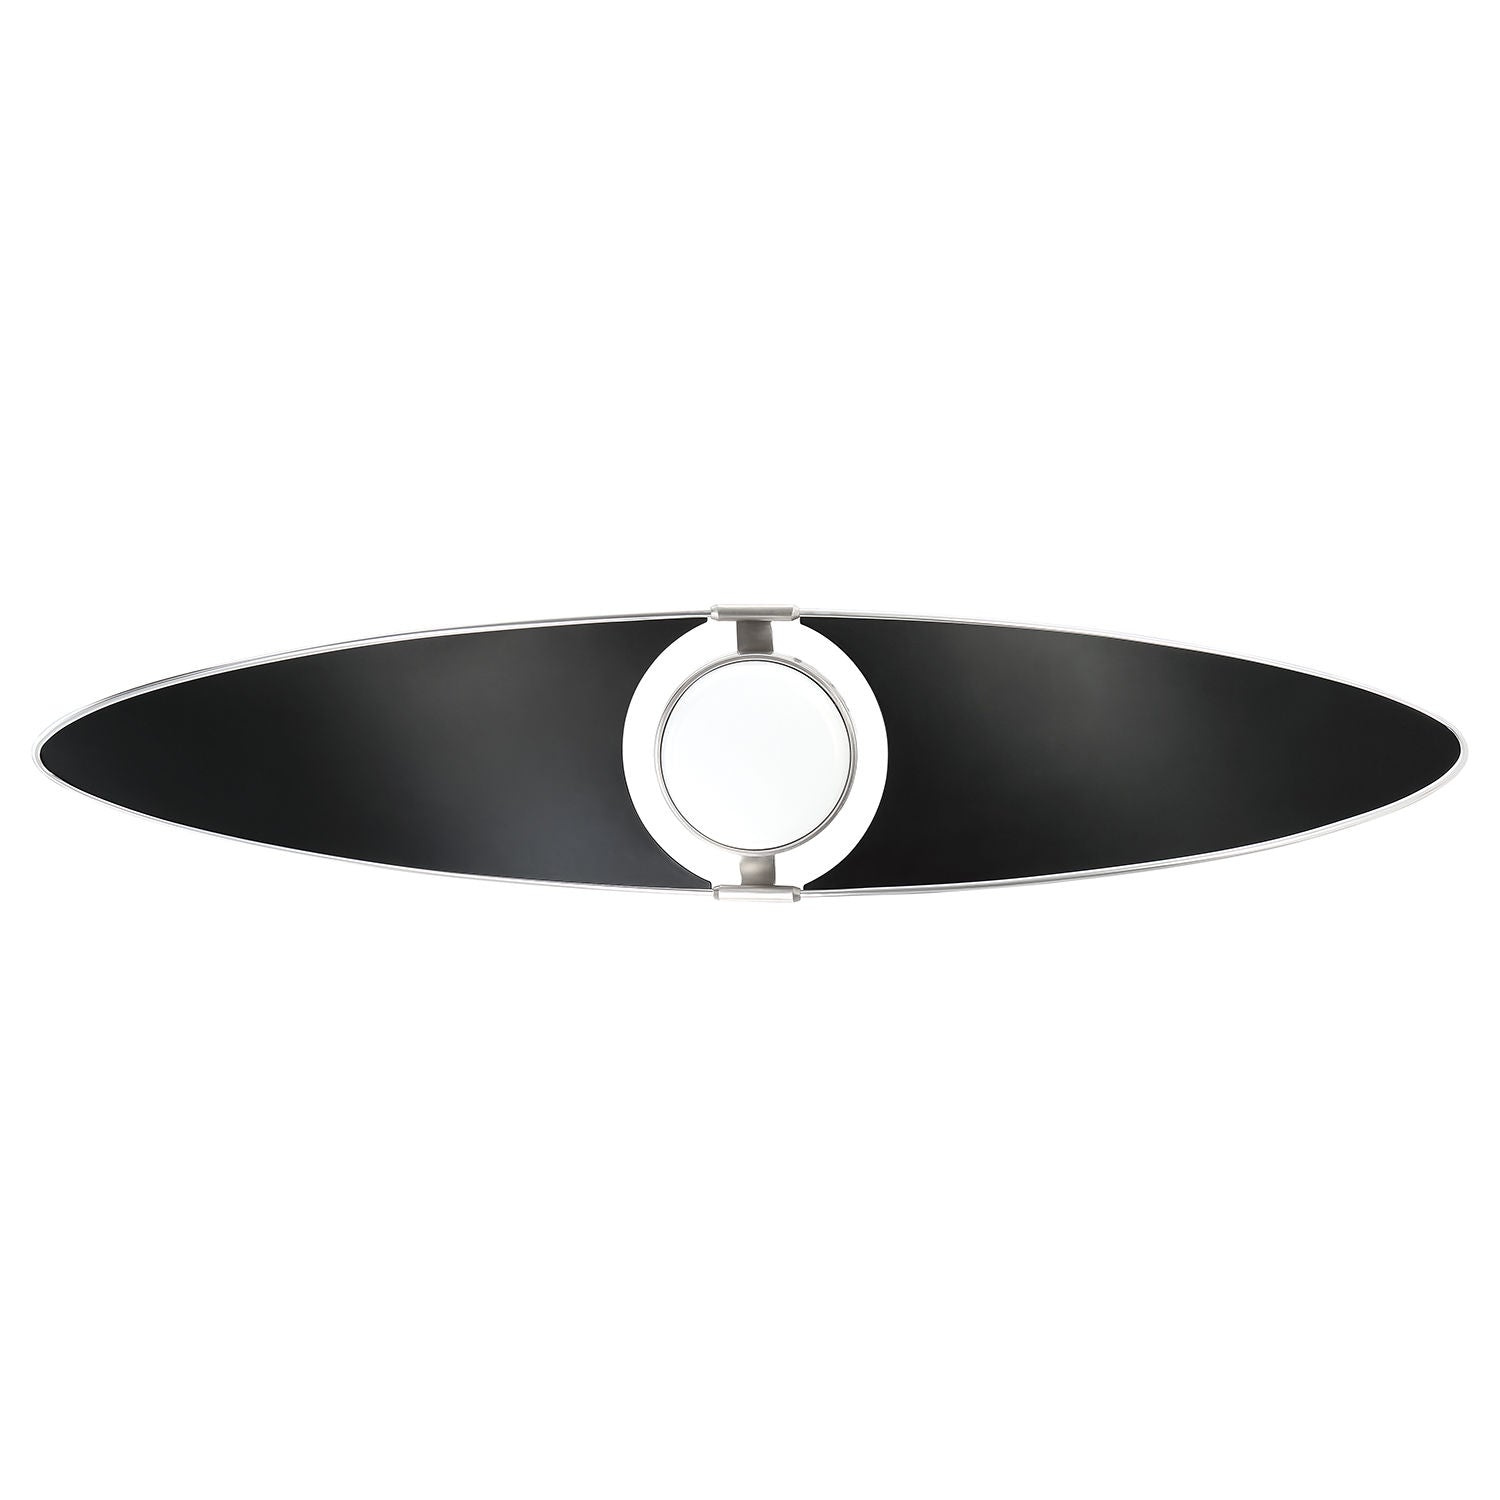 TANGO Ceiling fan Stainless steel, Black INTEGRATED LED - AC22852-SN/BLK | KENDAL